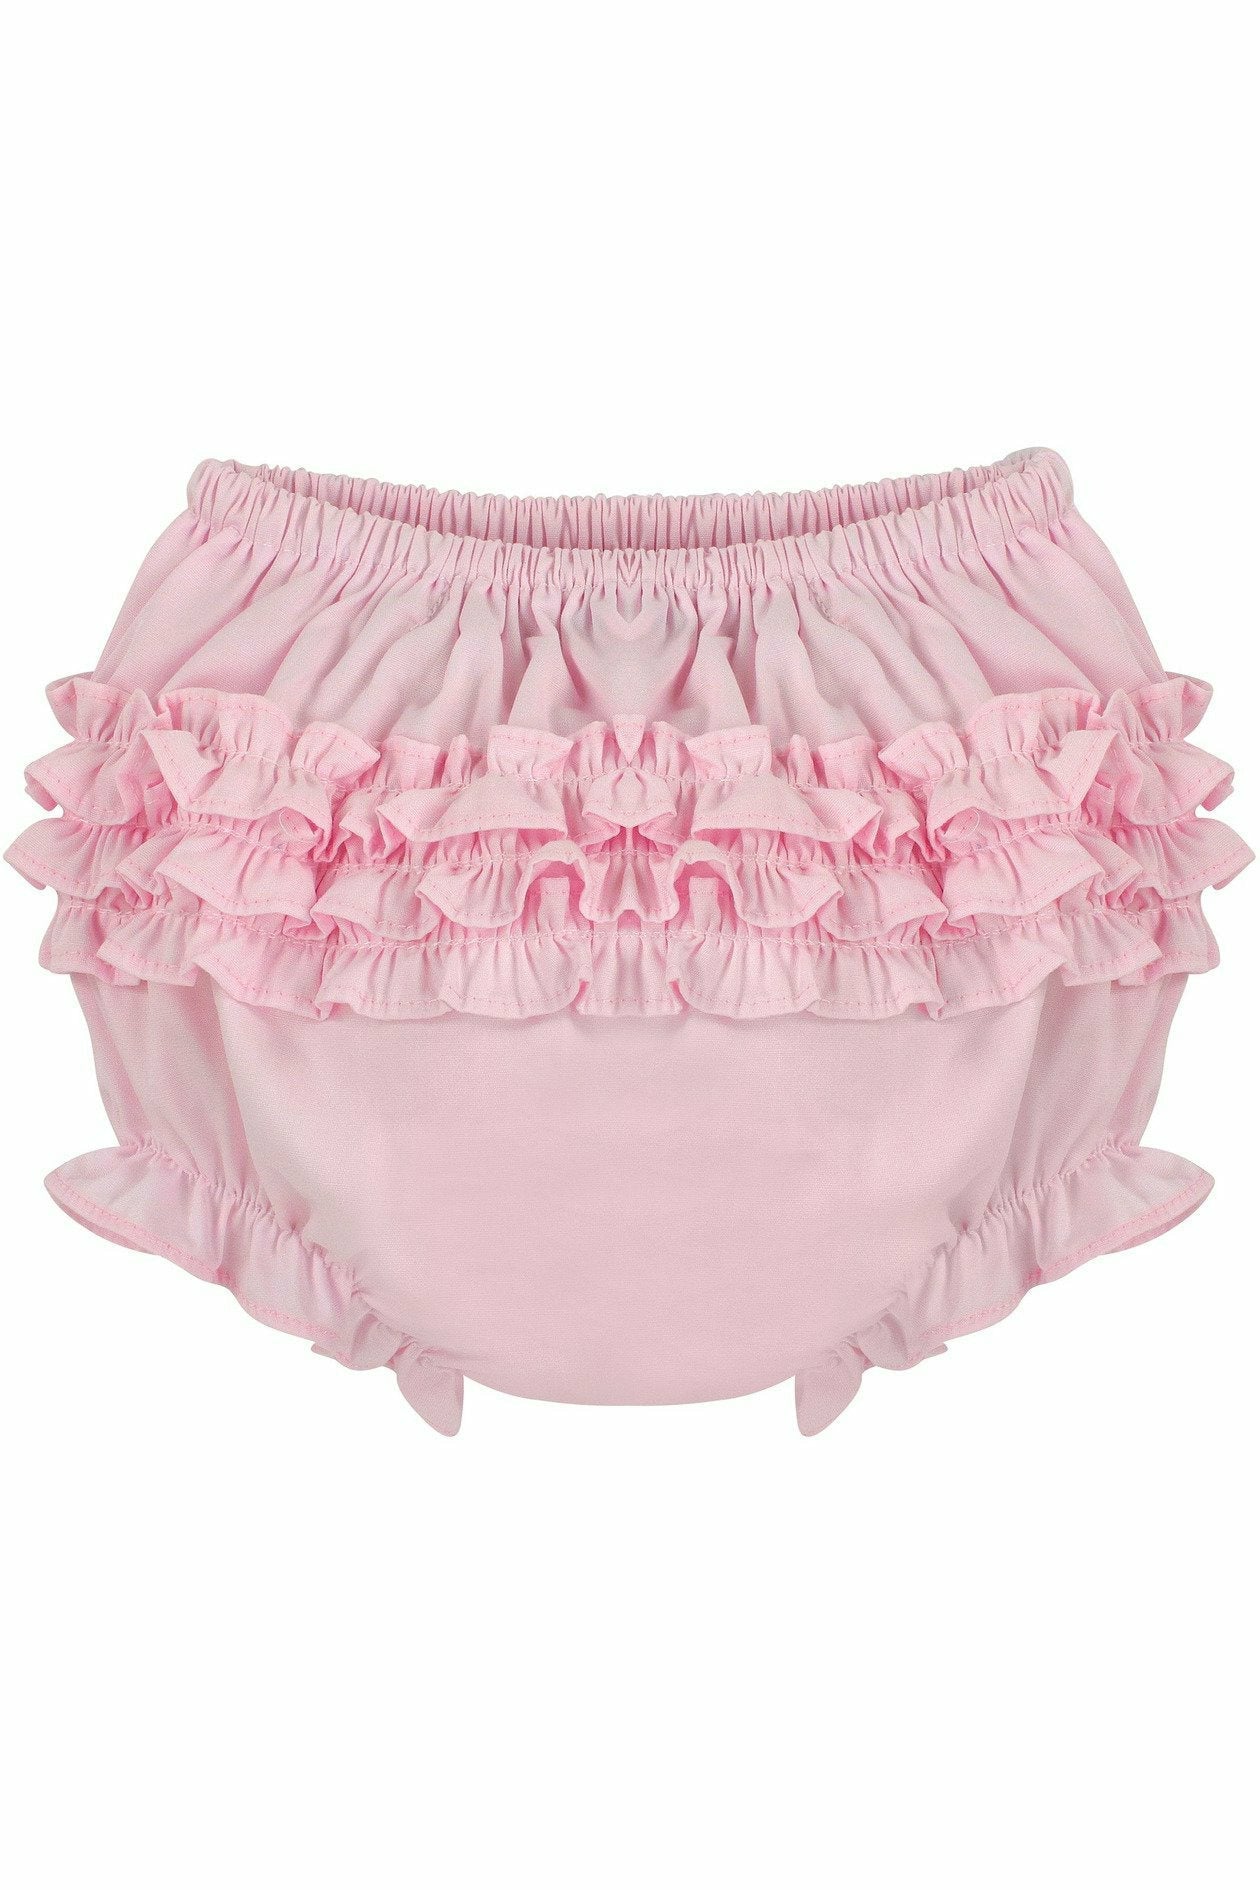 Baby Girls Ruffled Lace Bloomers-diaper Cover 